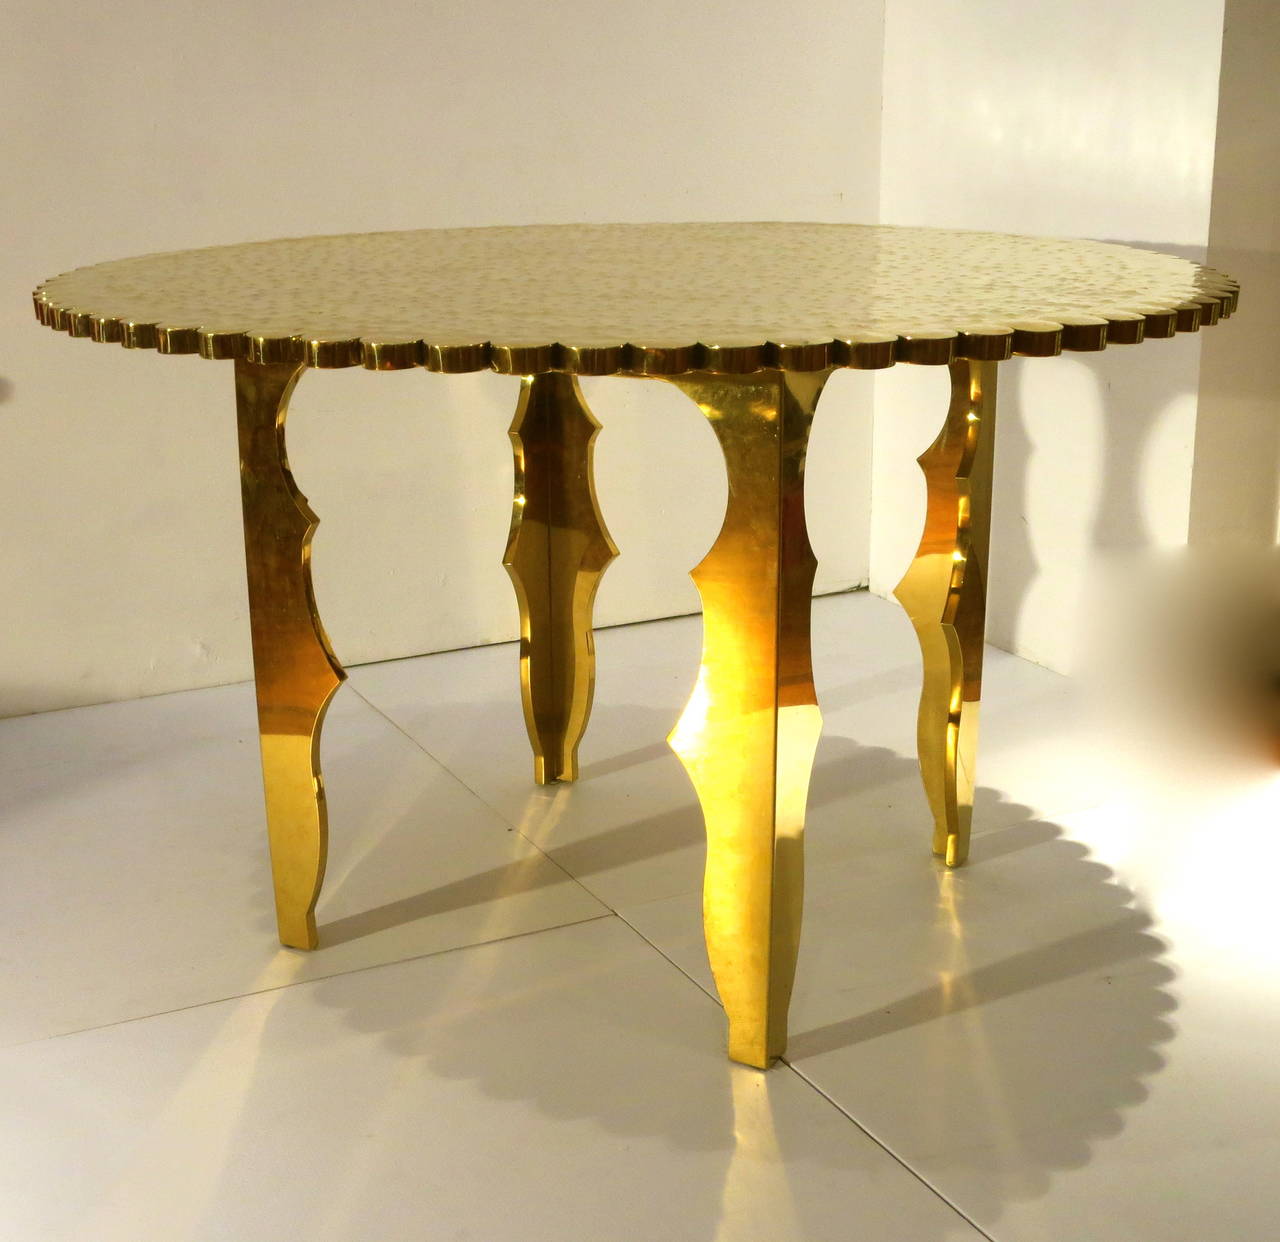 Monumental Large Brass Entry Table Hand-Hammered Top Scalloped Edge 1